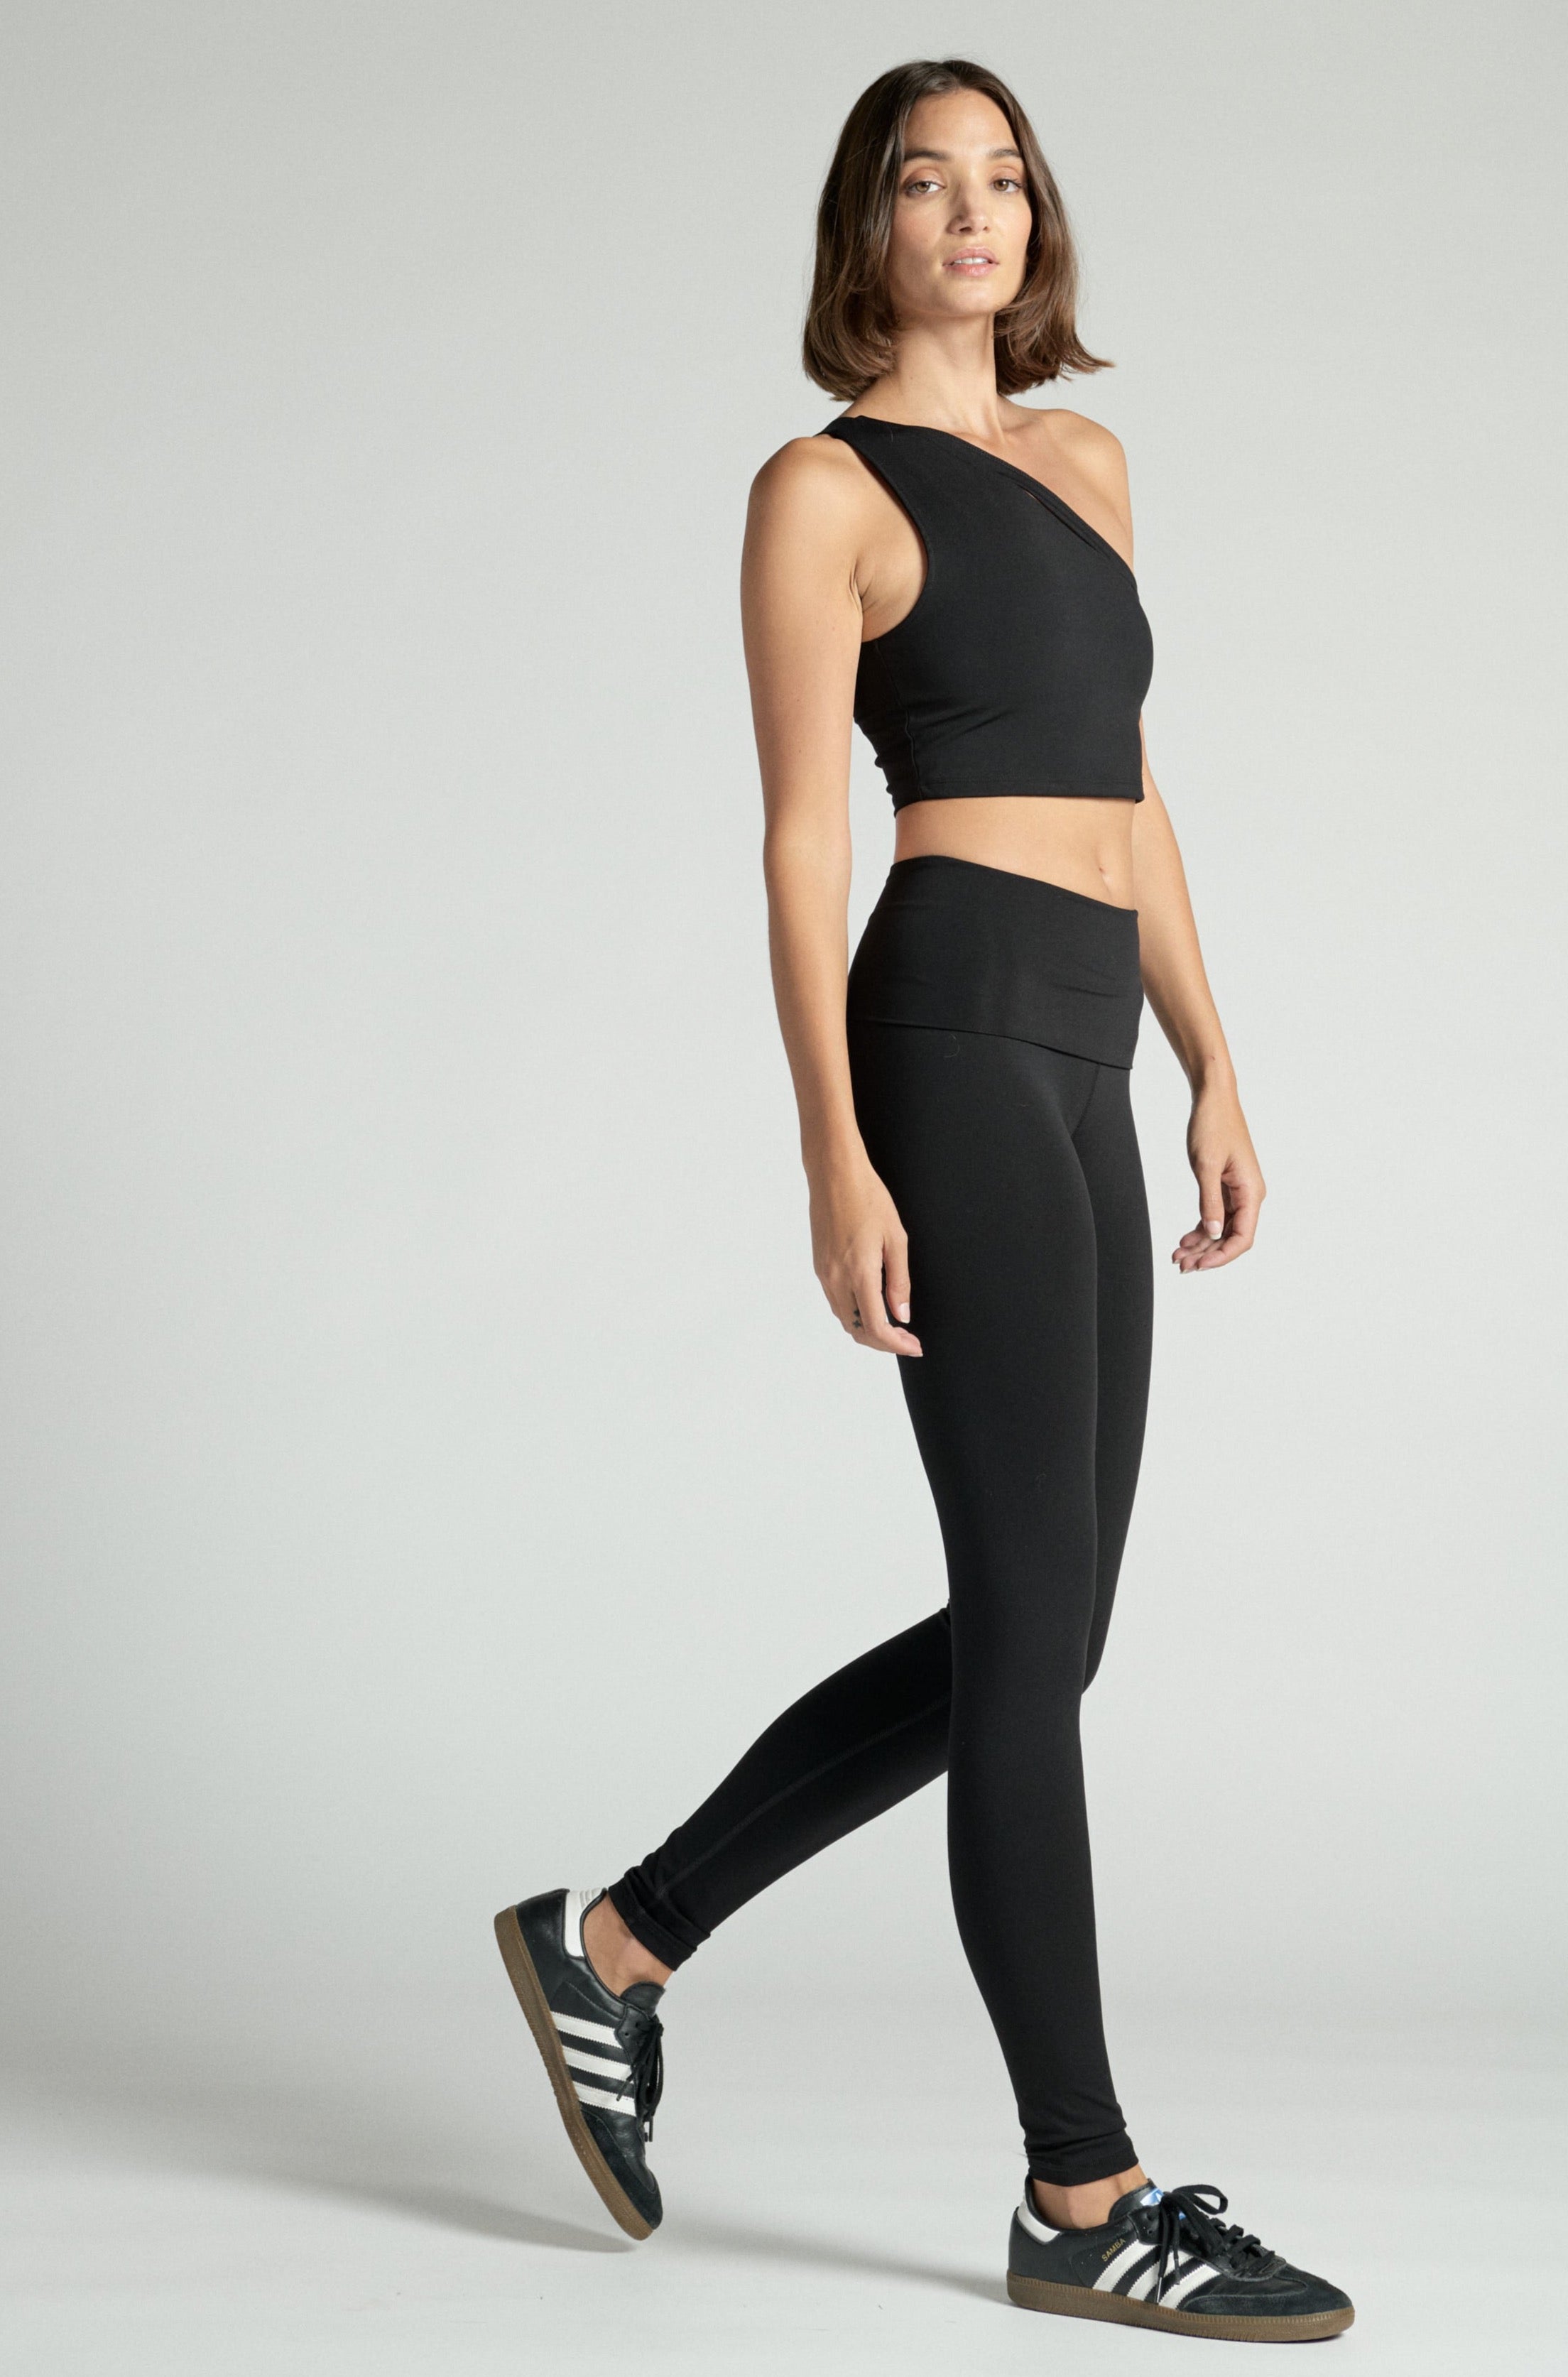 Sculpt tights, Workout tights